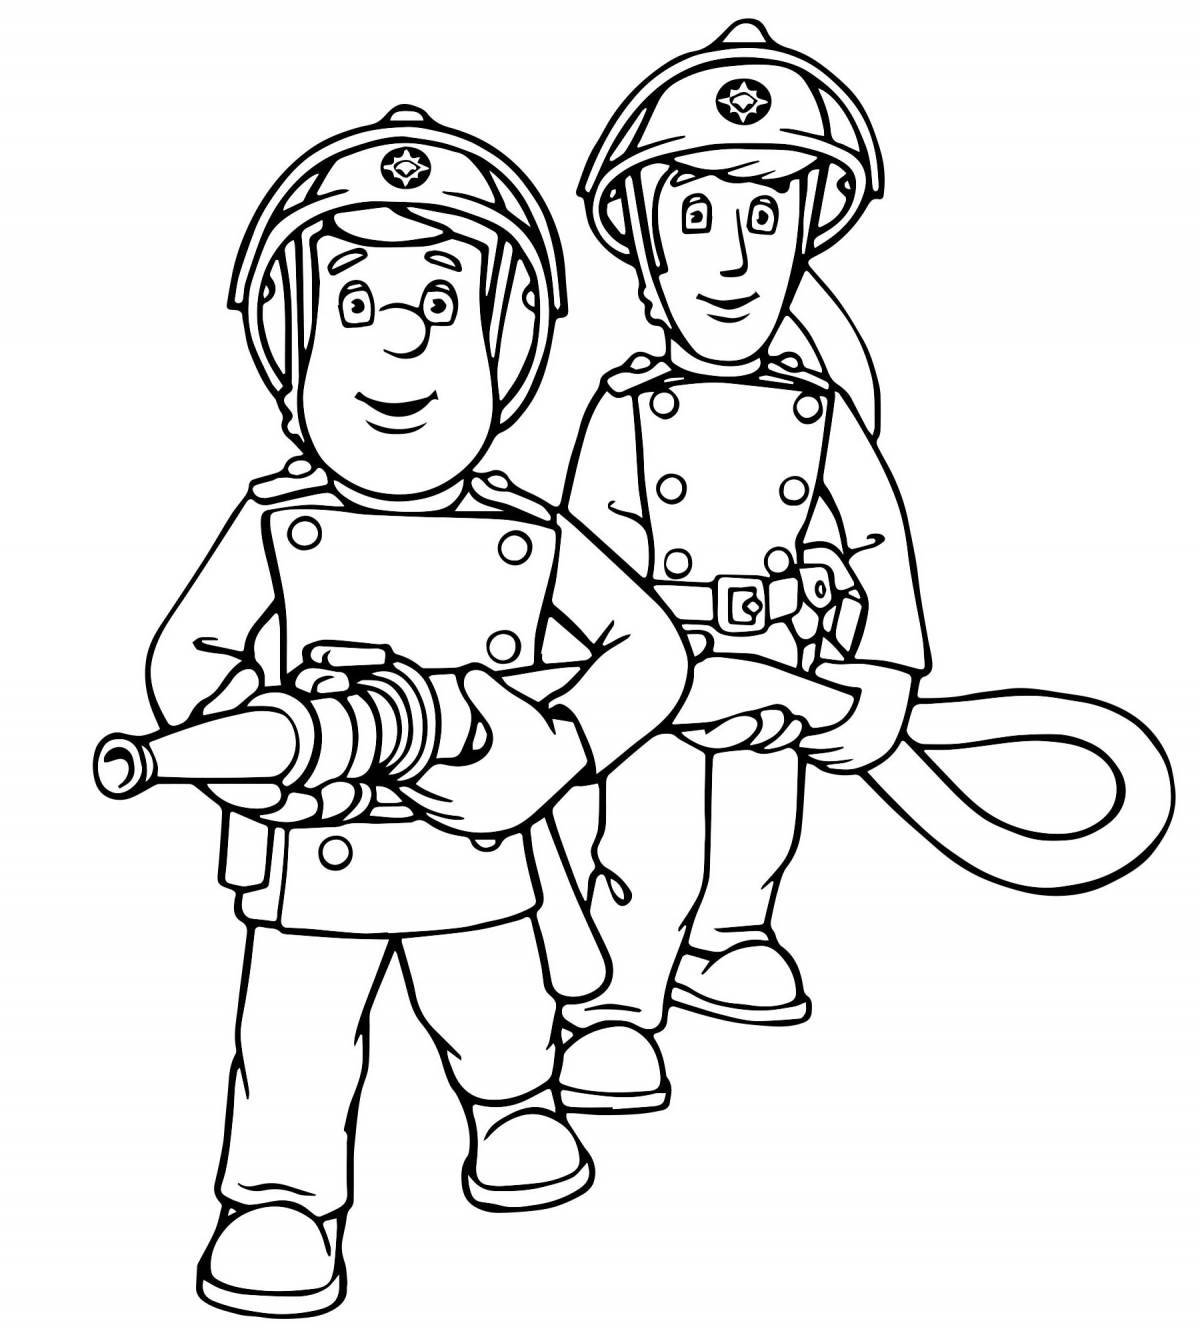 Saucy firefighter coloring page for kids